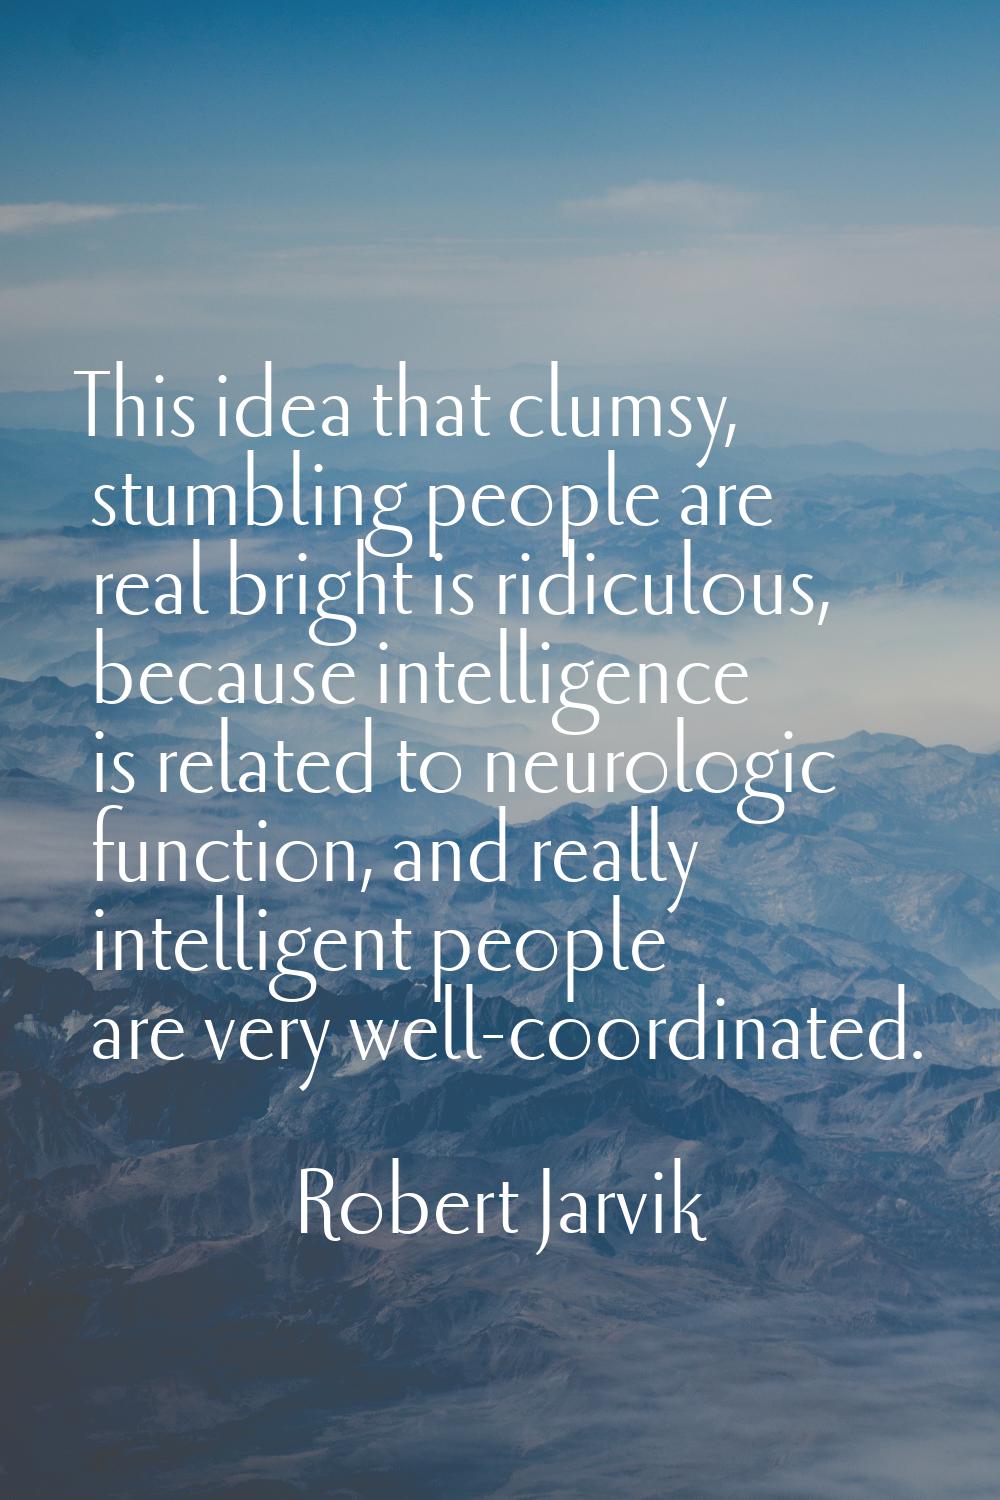 This idea that clumsy, stumbling people are real bright is ridiculous, because intelligence is rela